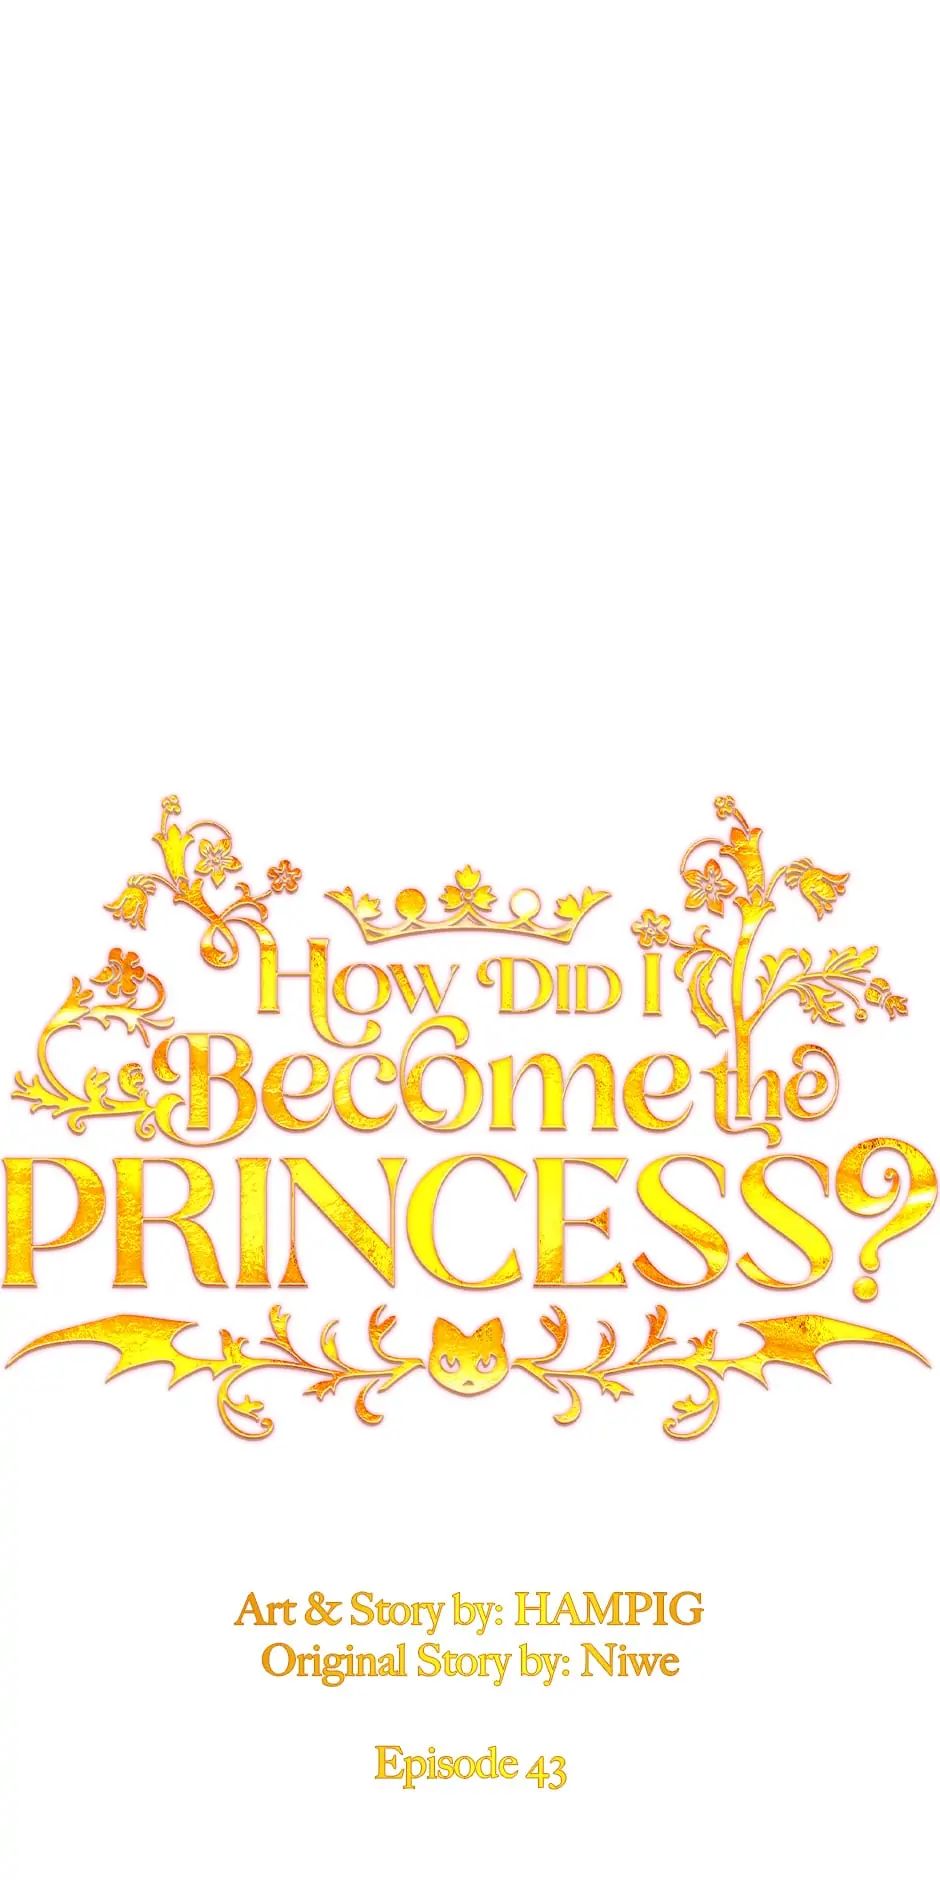 Starting From Today, I’M A Princess? - Page 2